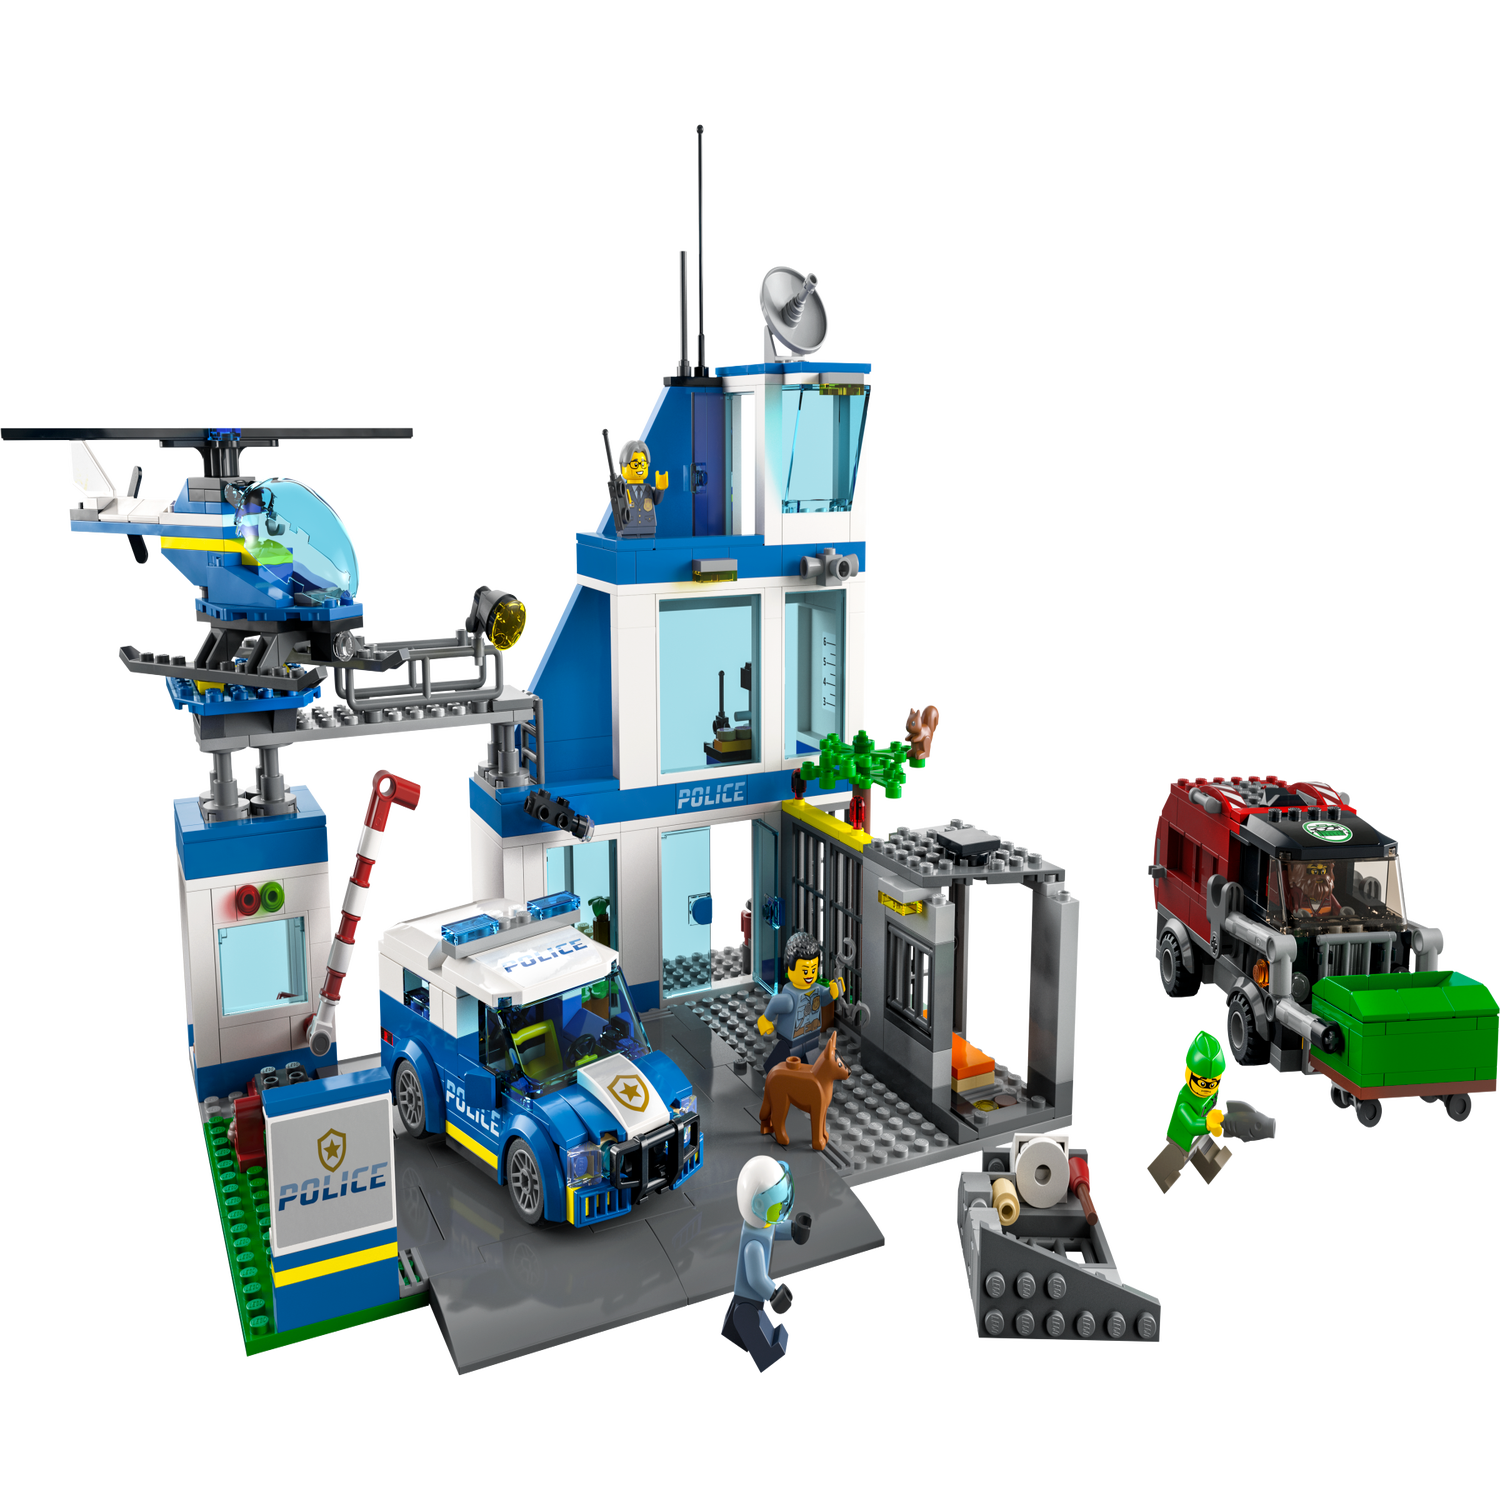 Big Box 41960 | DOTS | Buy online at the Official LEGO® Shop US